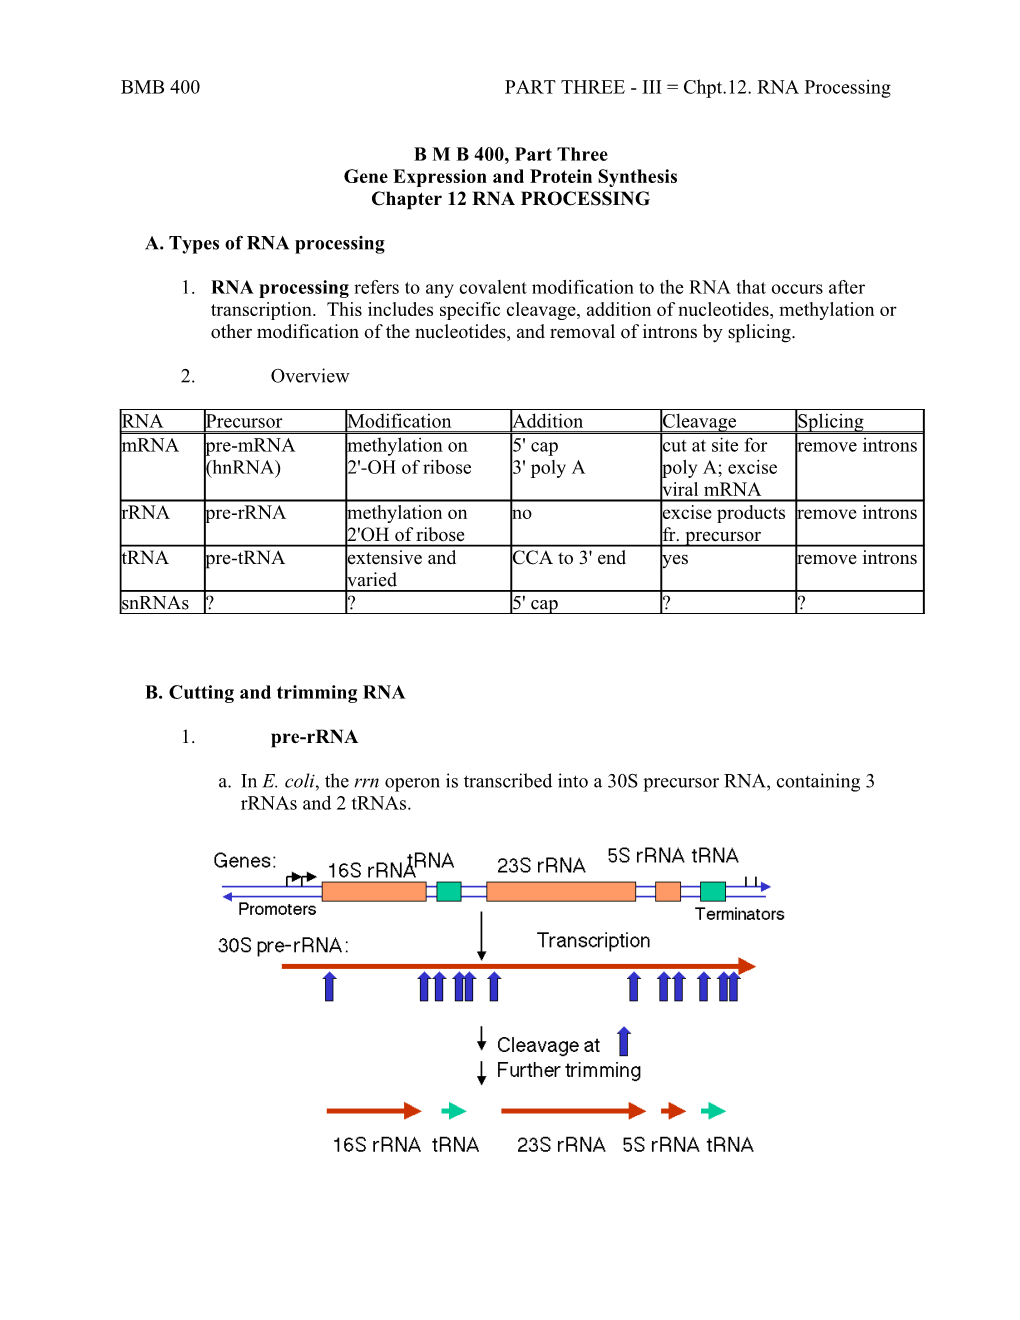 Part Three: Gene Expression and Protein Synthesis